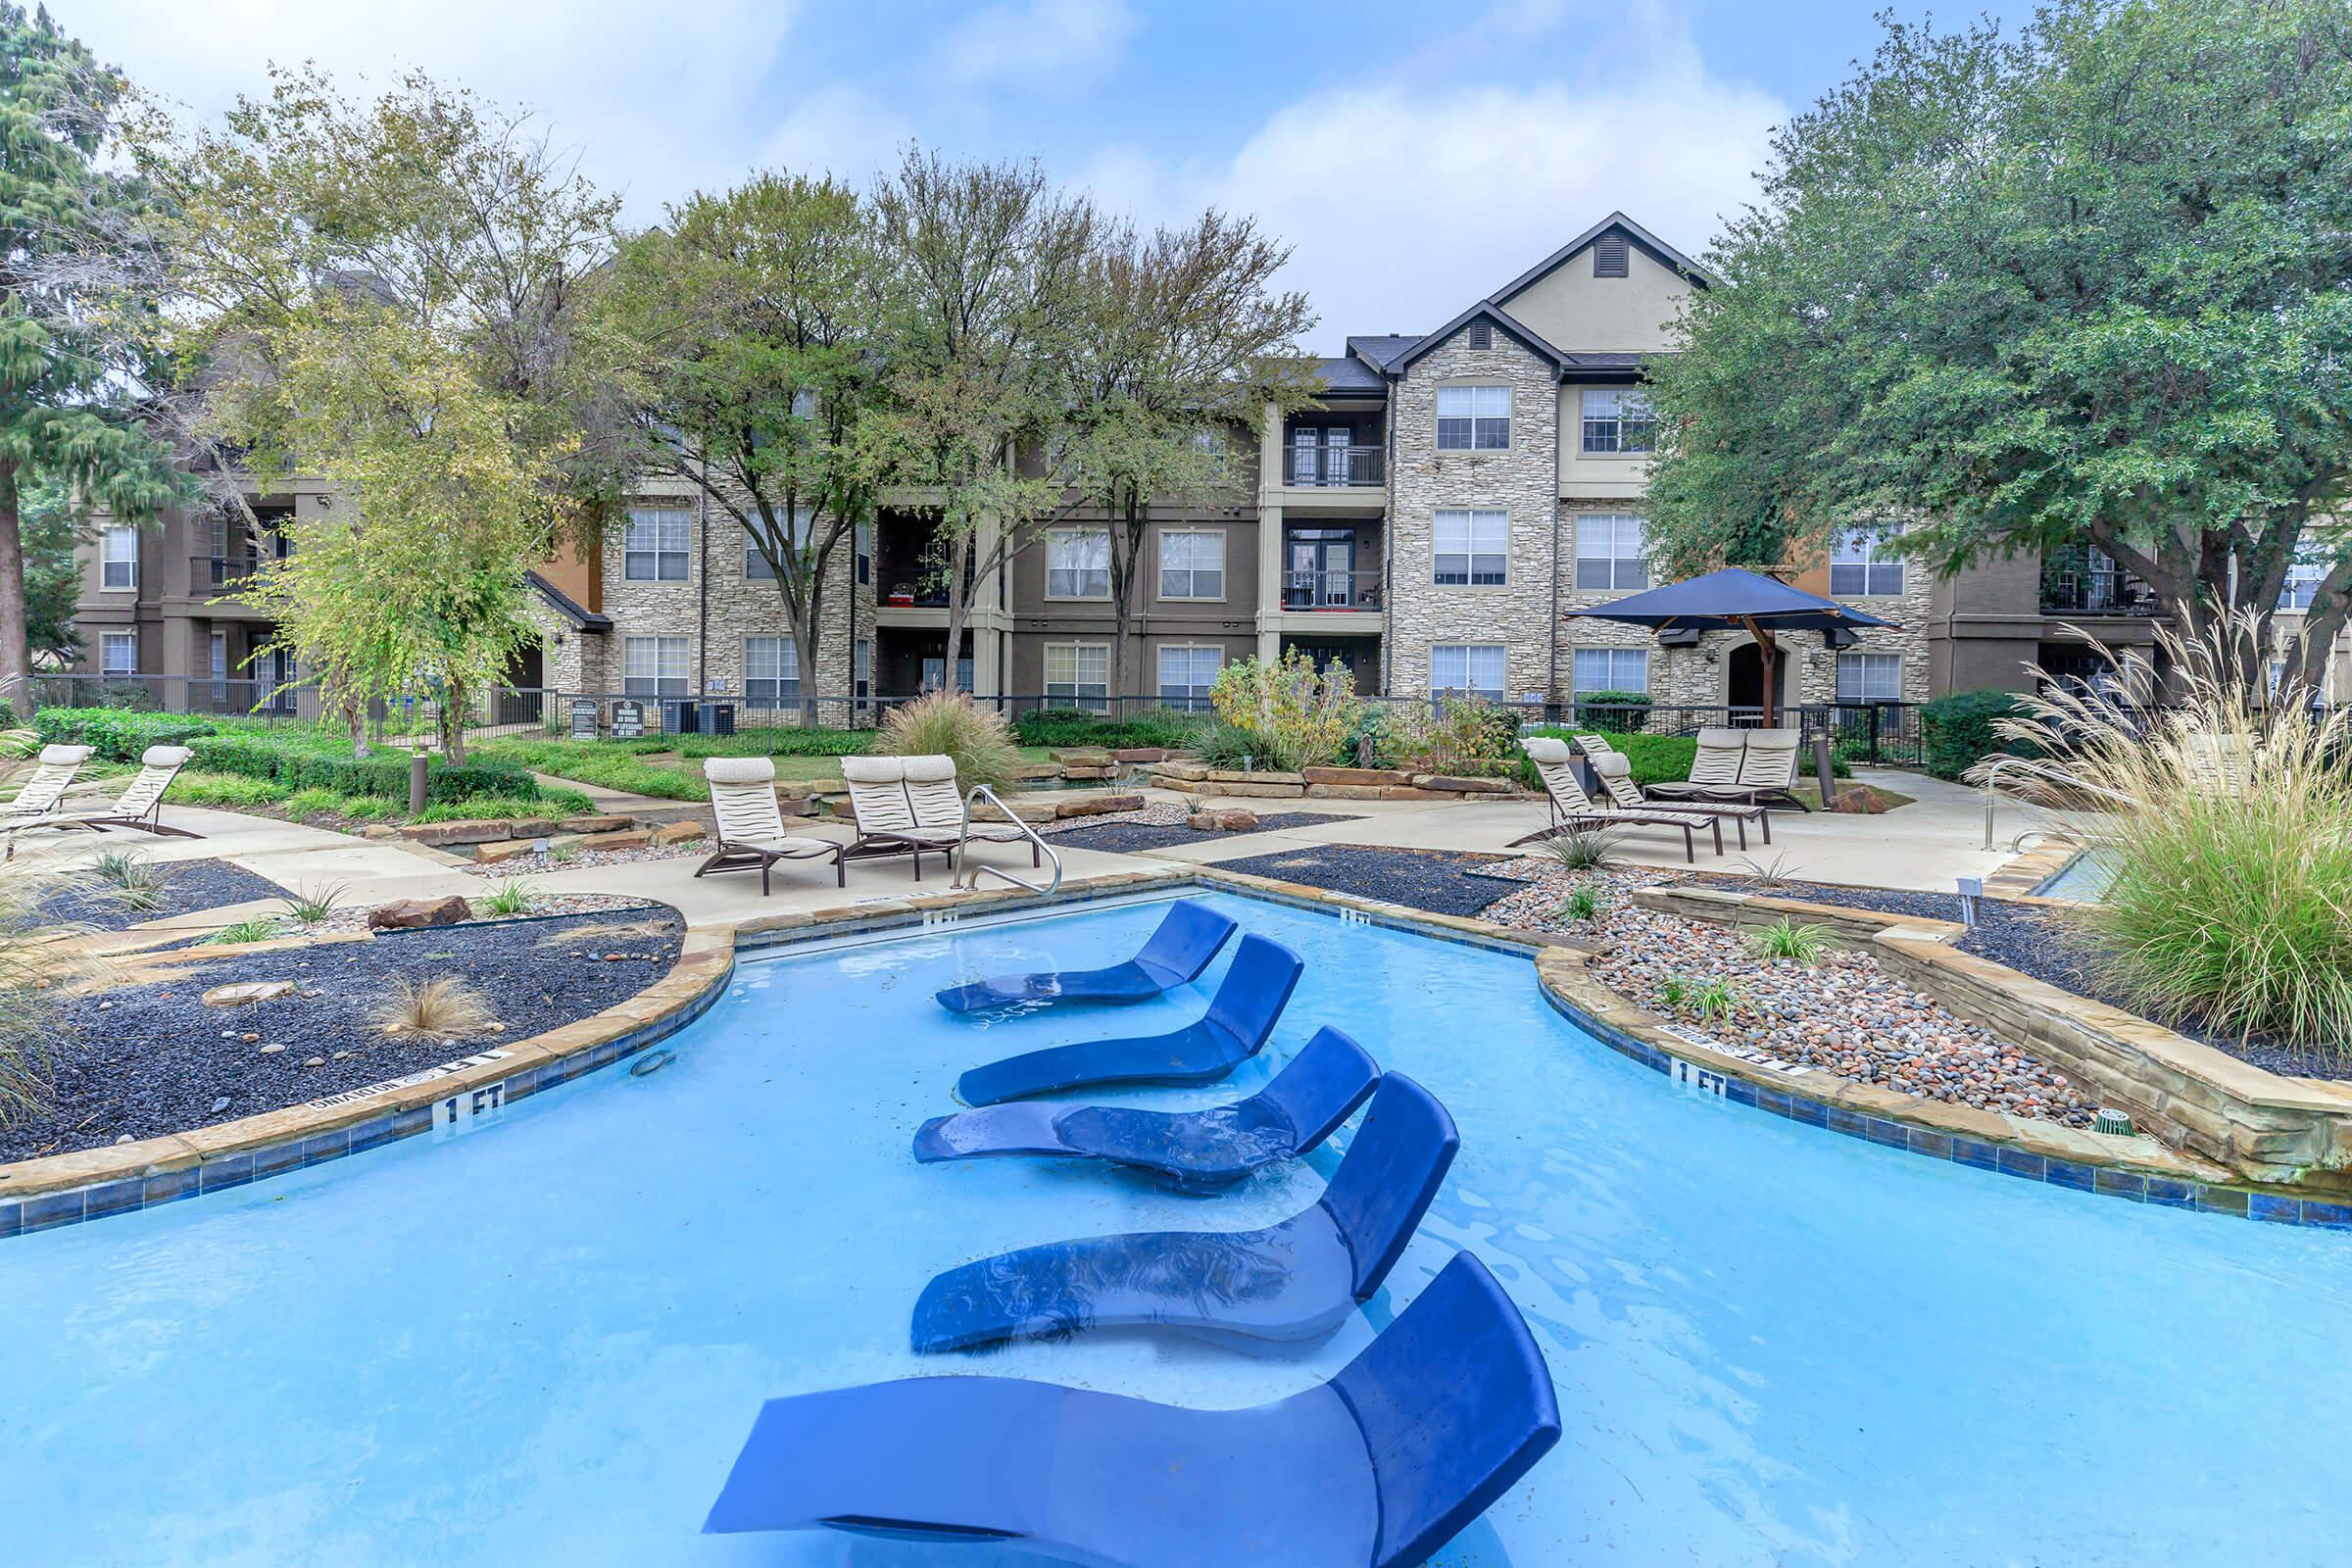 Lake Pointe community pool with in-pool loungers